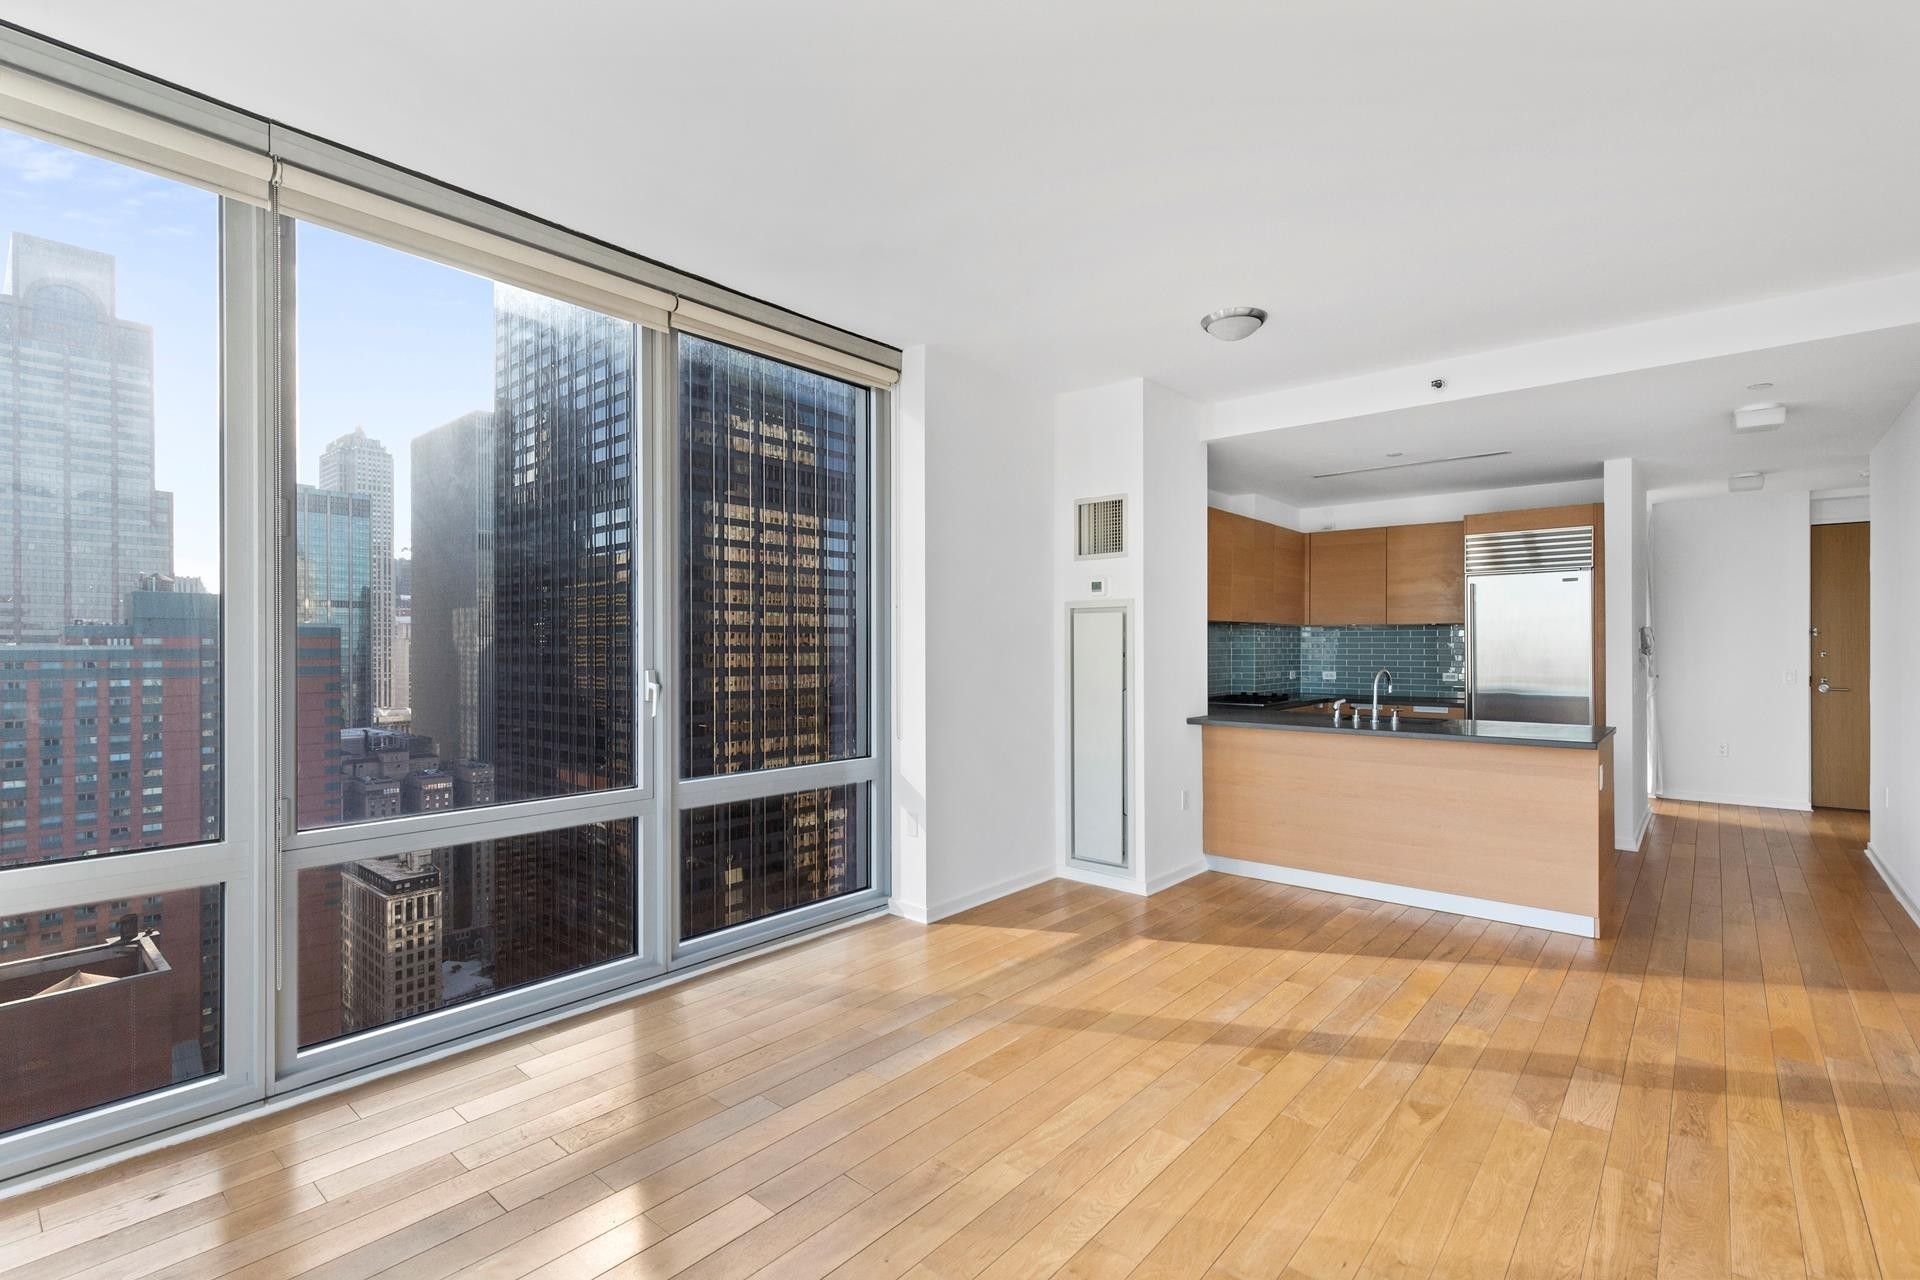 3. Condominiums for Sale at The Link, 310 W 52ND ST, 36J Hell's Kitchen, New York, NY 10019